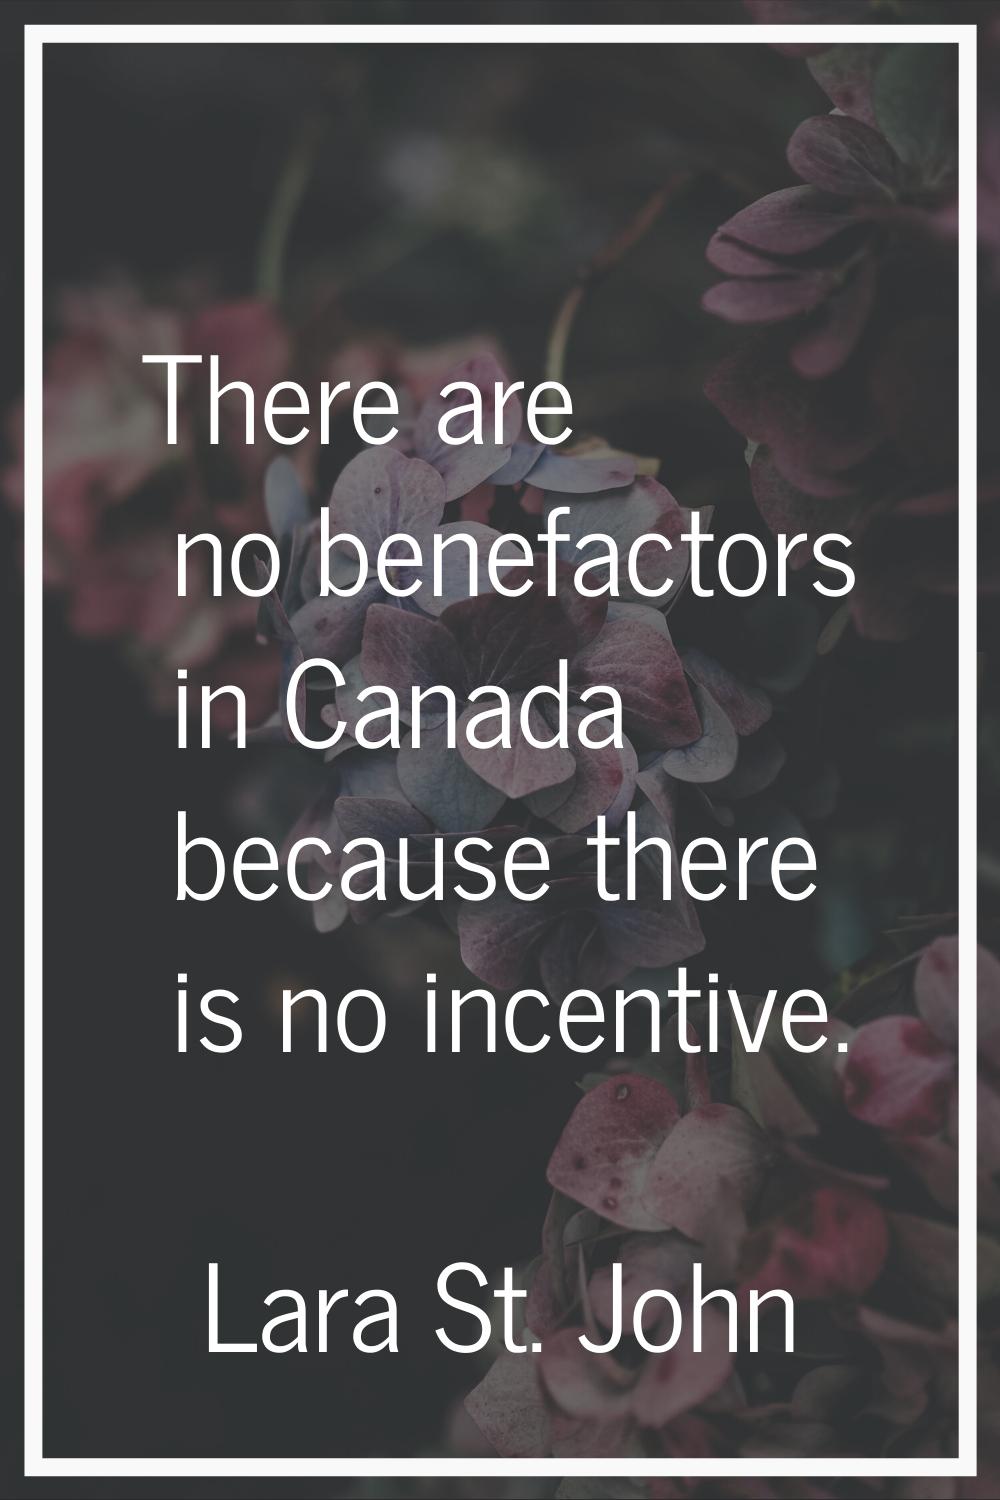 There are no benefactors in Canada because there is no incentive.